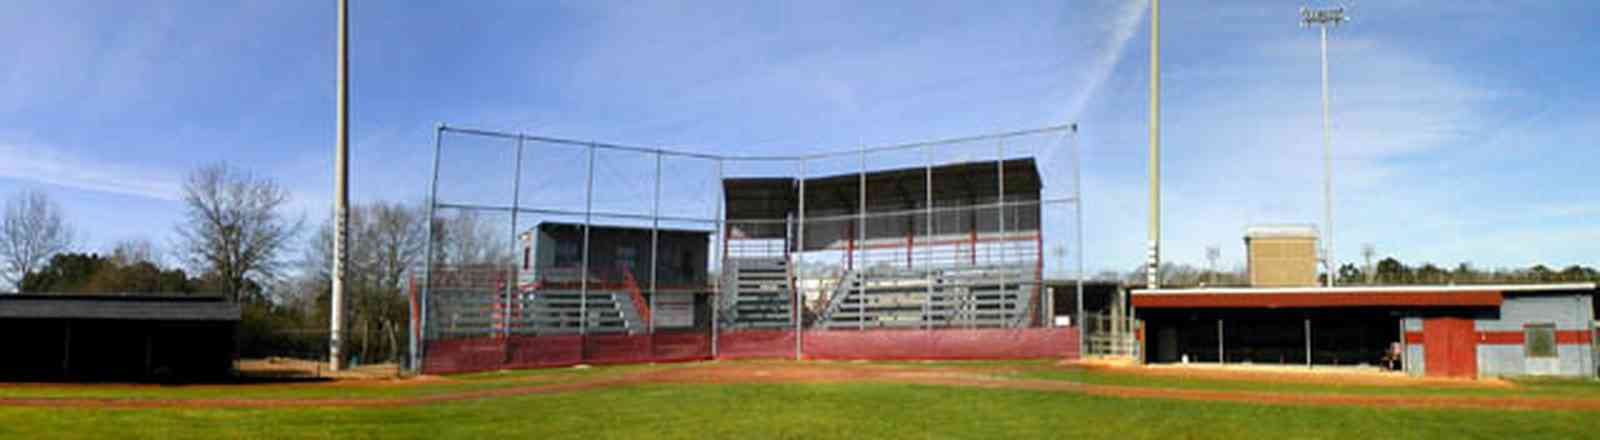 Pensacola:-Tate-High-School_00a.jpg:  grandstand, home plate, baseball field, dugouts, escambia county, home plate, concession stand, press box, gonzales